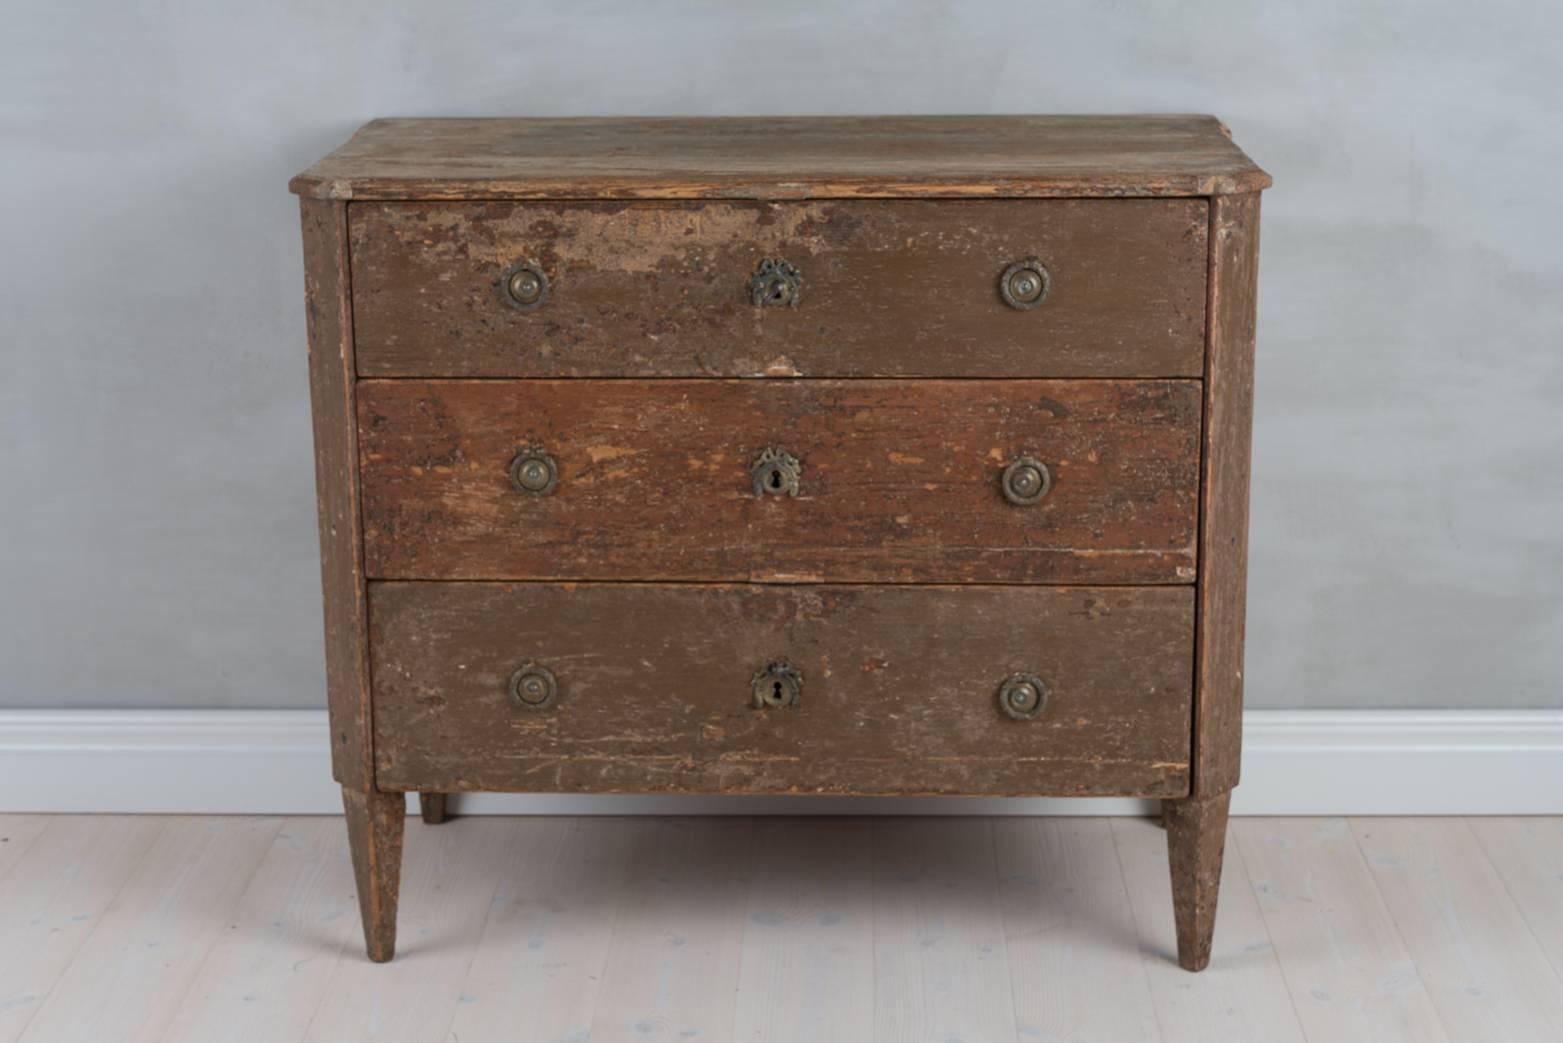 Gustavian bureau with three drawers. The bureau has canted corners and has been scraped to original paint. Lock, key and hardware are all original.